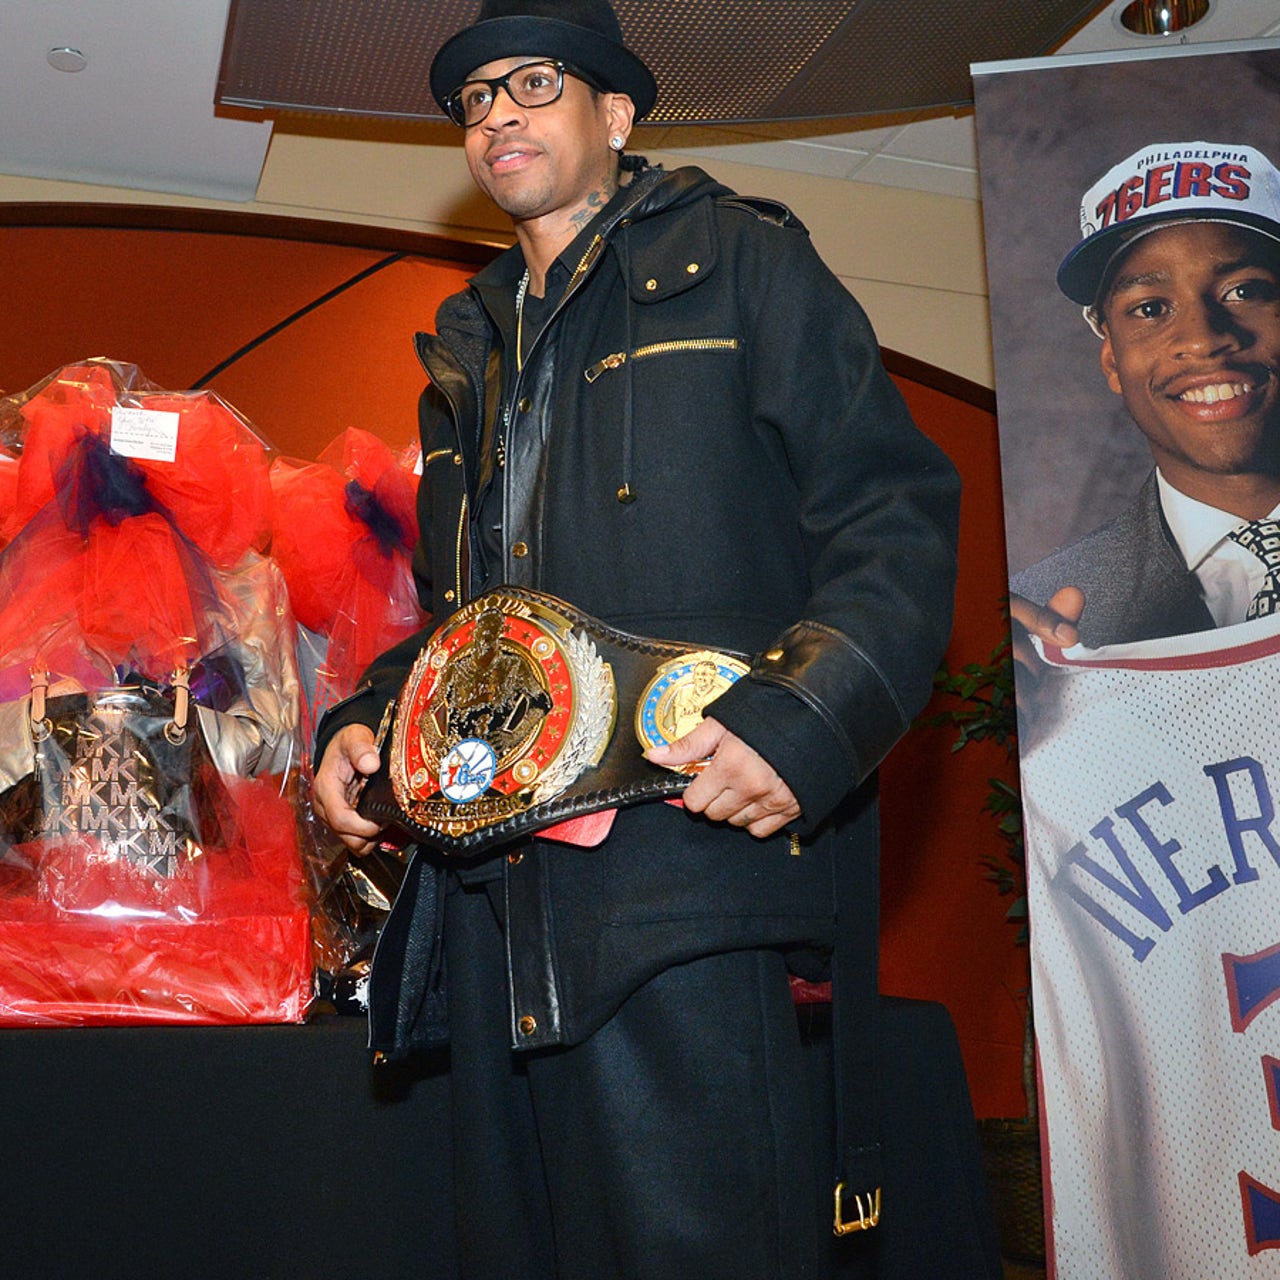 Sixers to honor Allen Iverson with jersey retirement - Sports